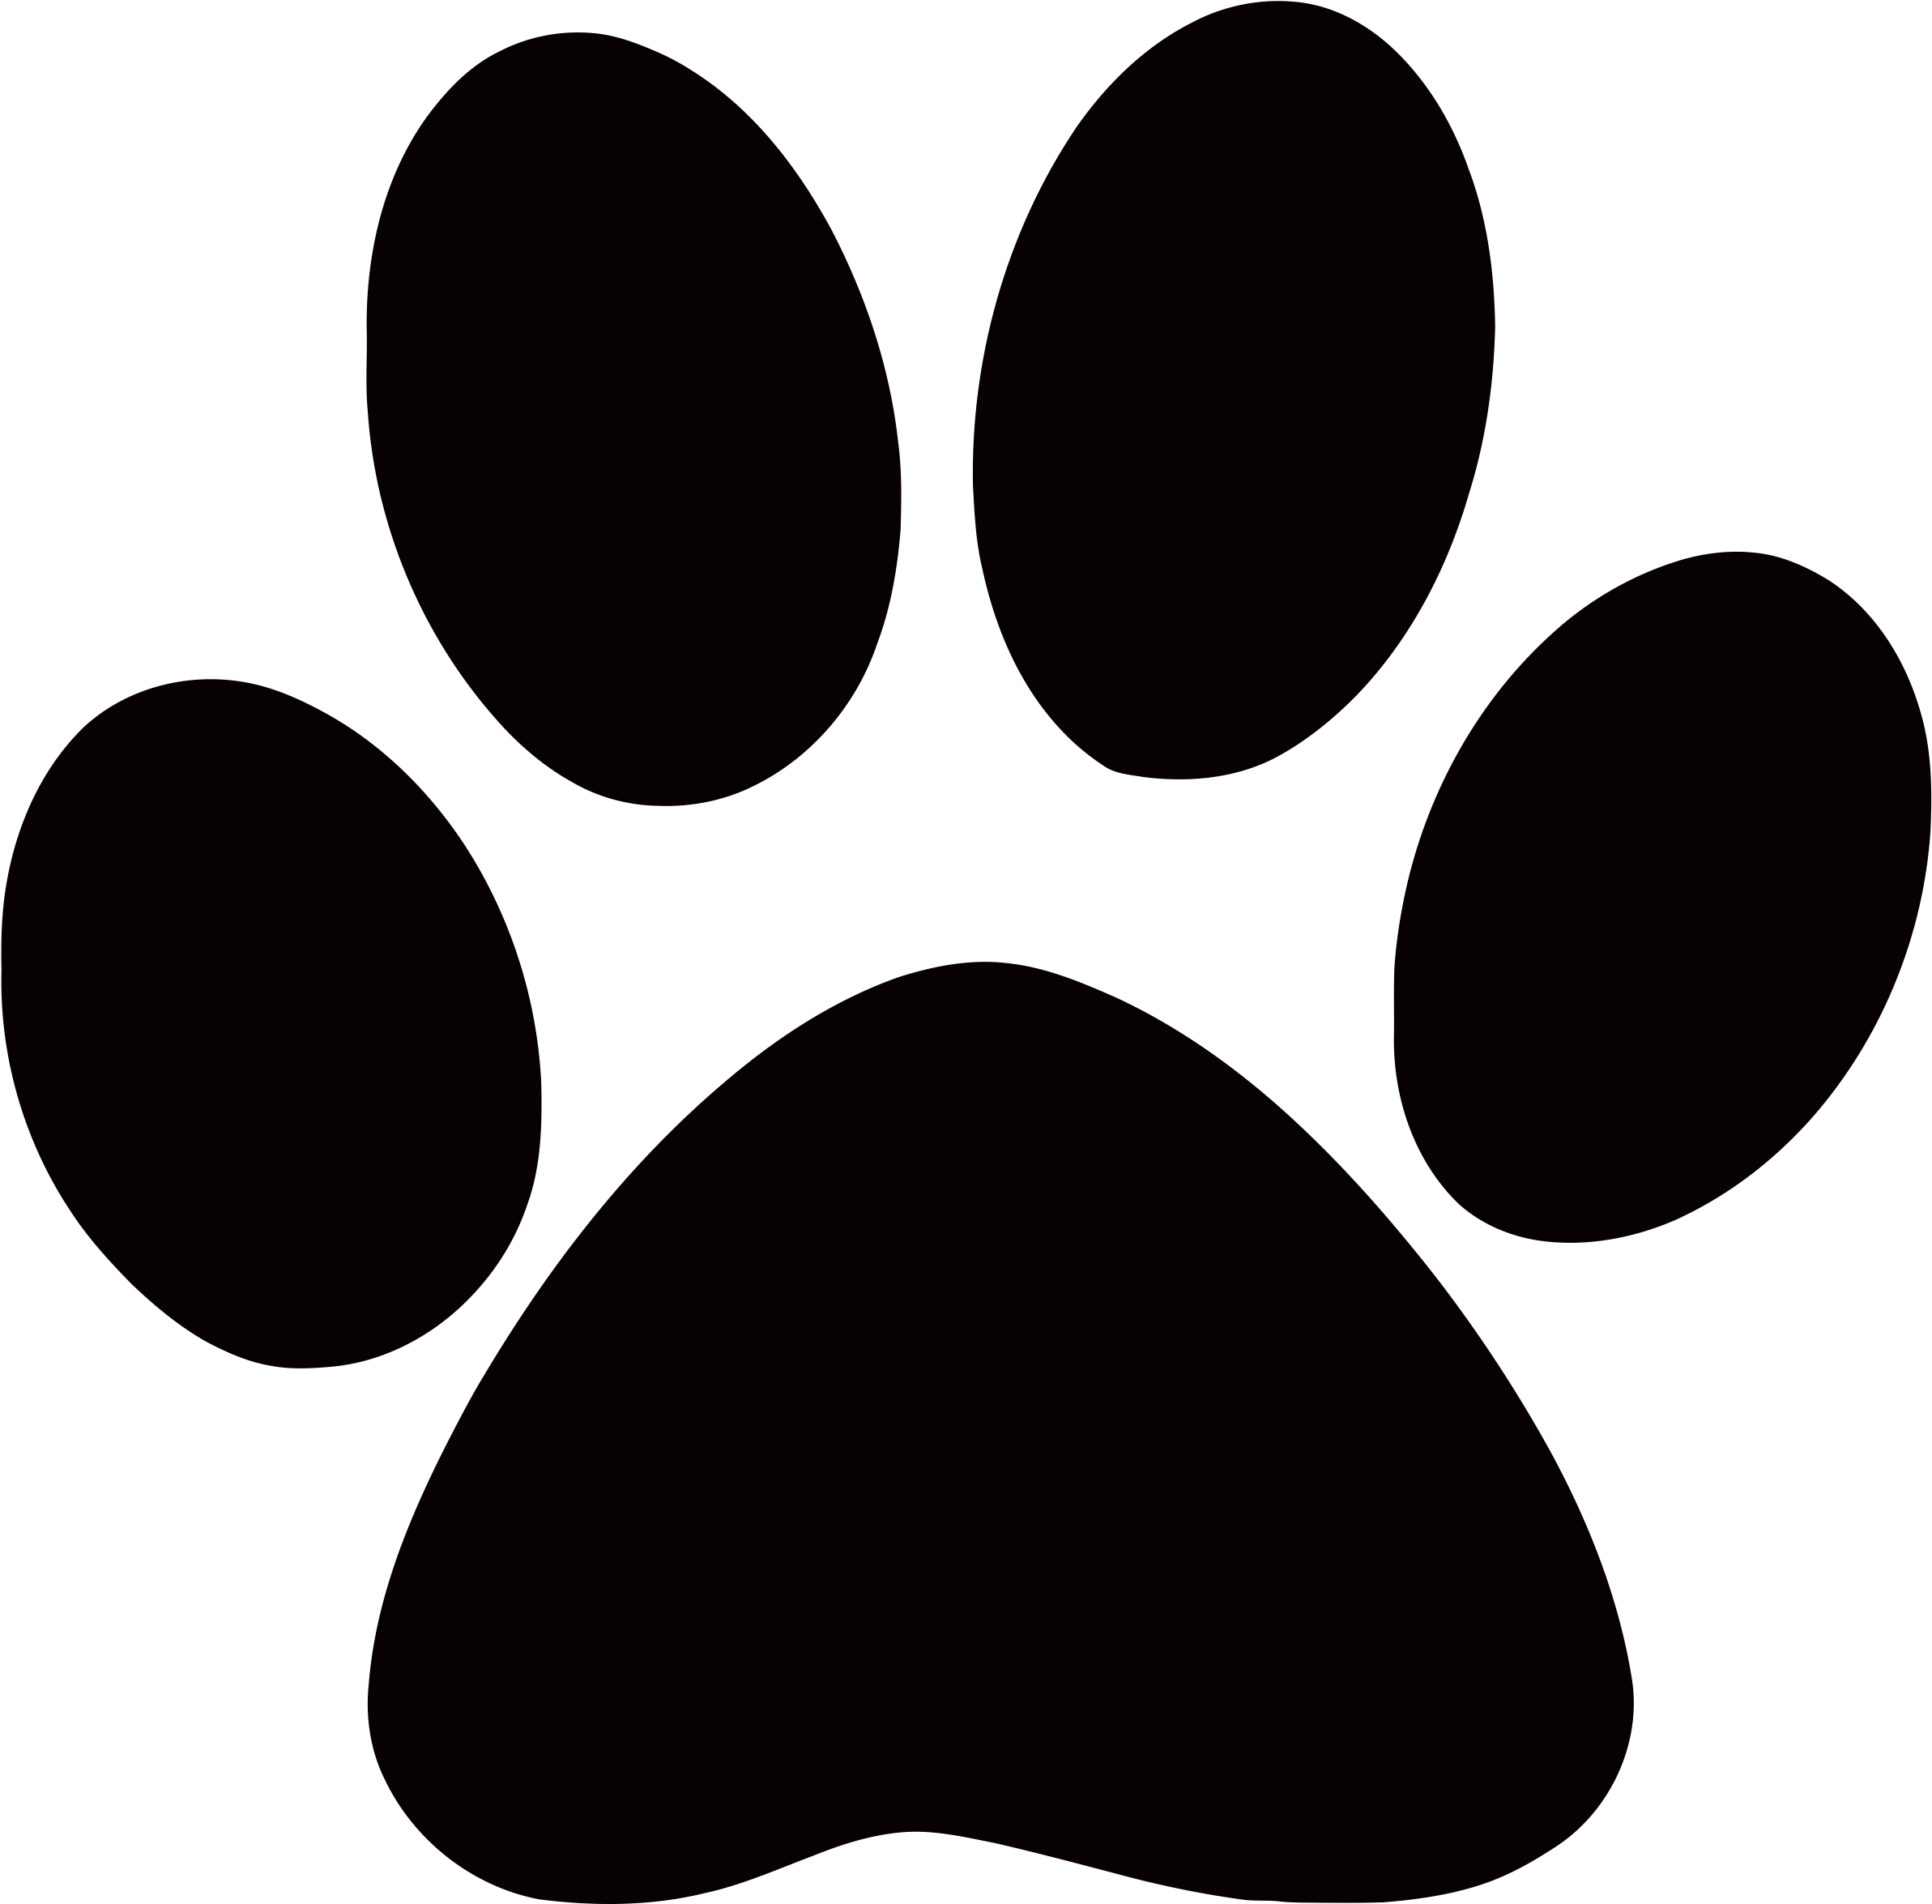 Paw Print Silhouette Graphic